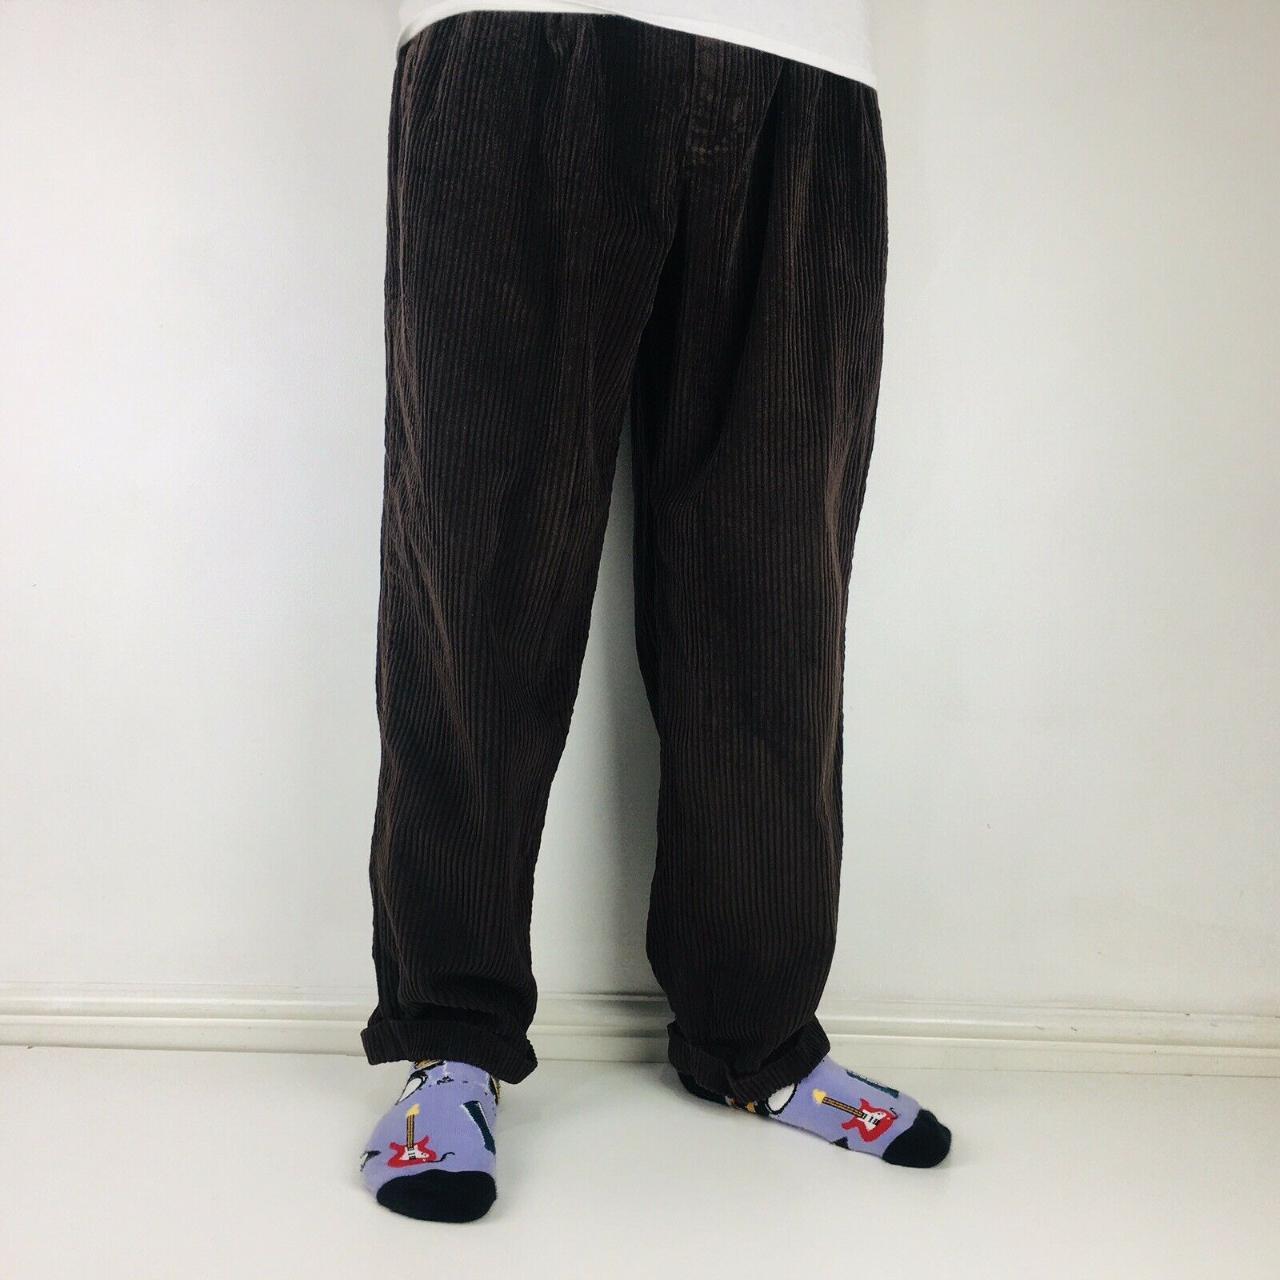 Product Image 1 - Vintage Corduroy Trousers 

Brand: Clubroom

Cuffed

Great